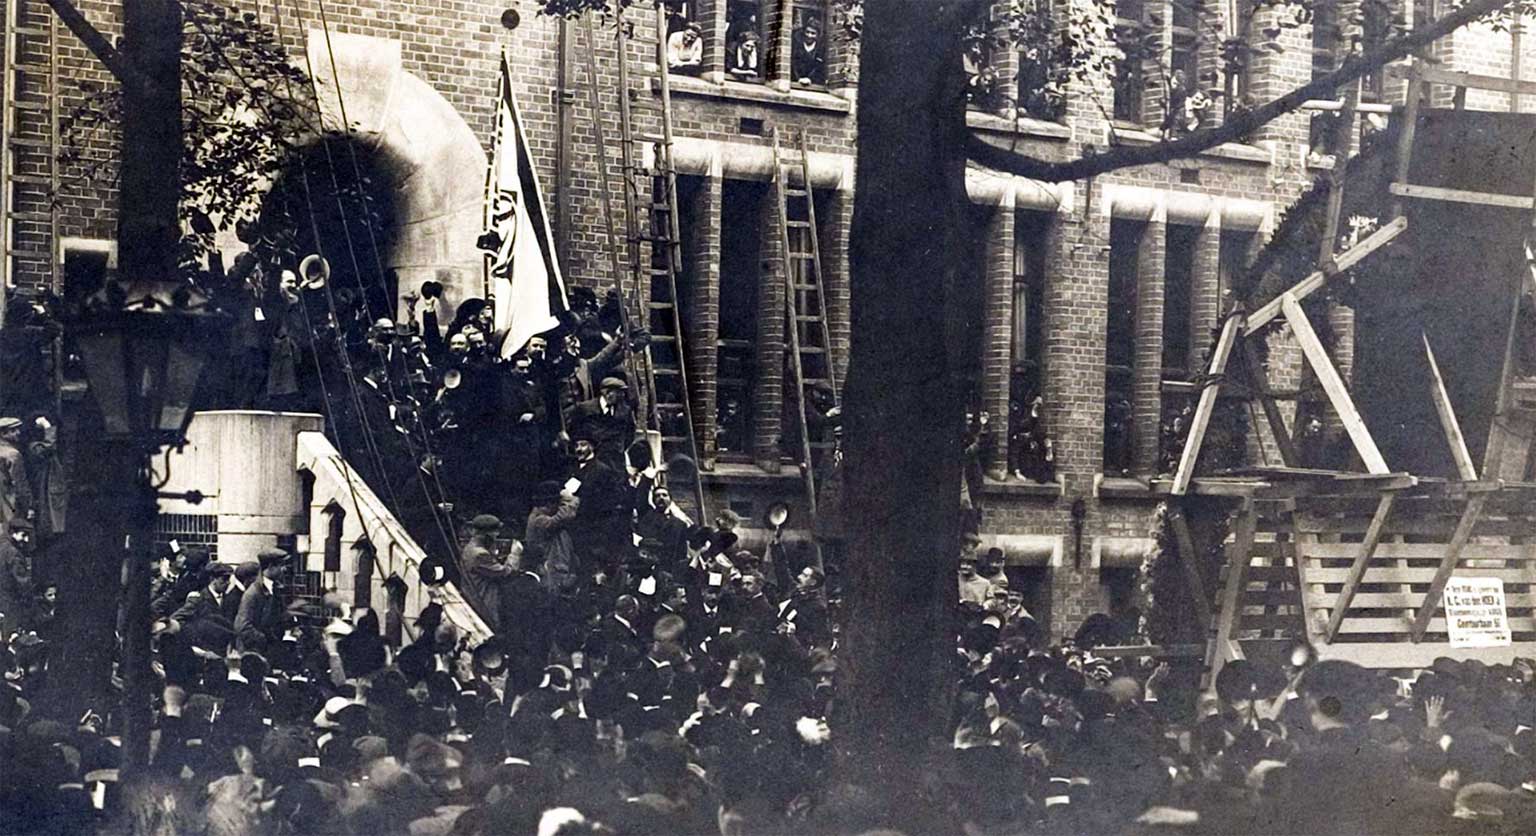 Demonstration at the ANDB building, Amsterdam, in 1911